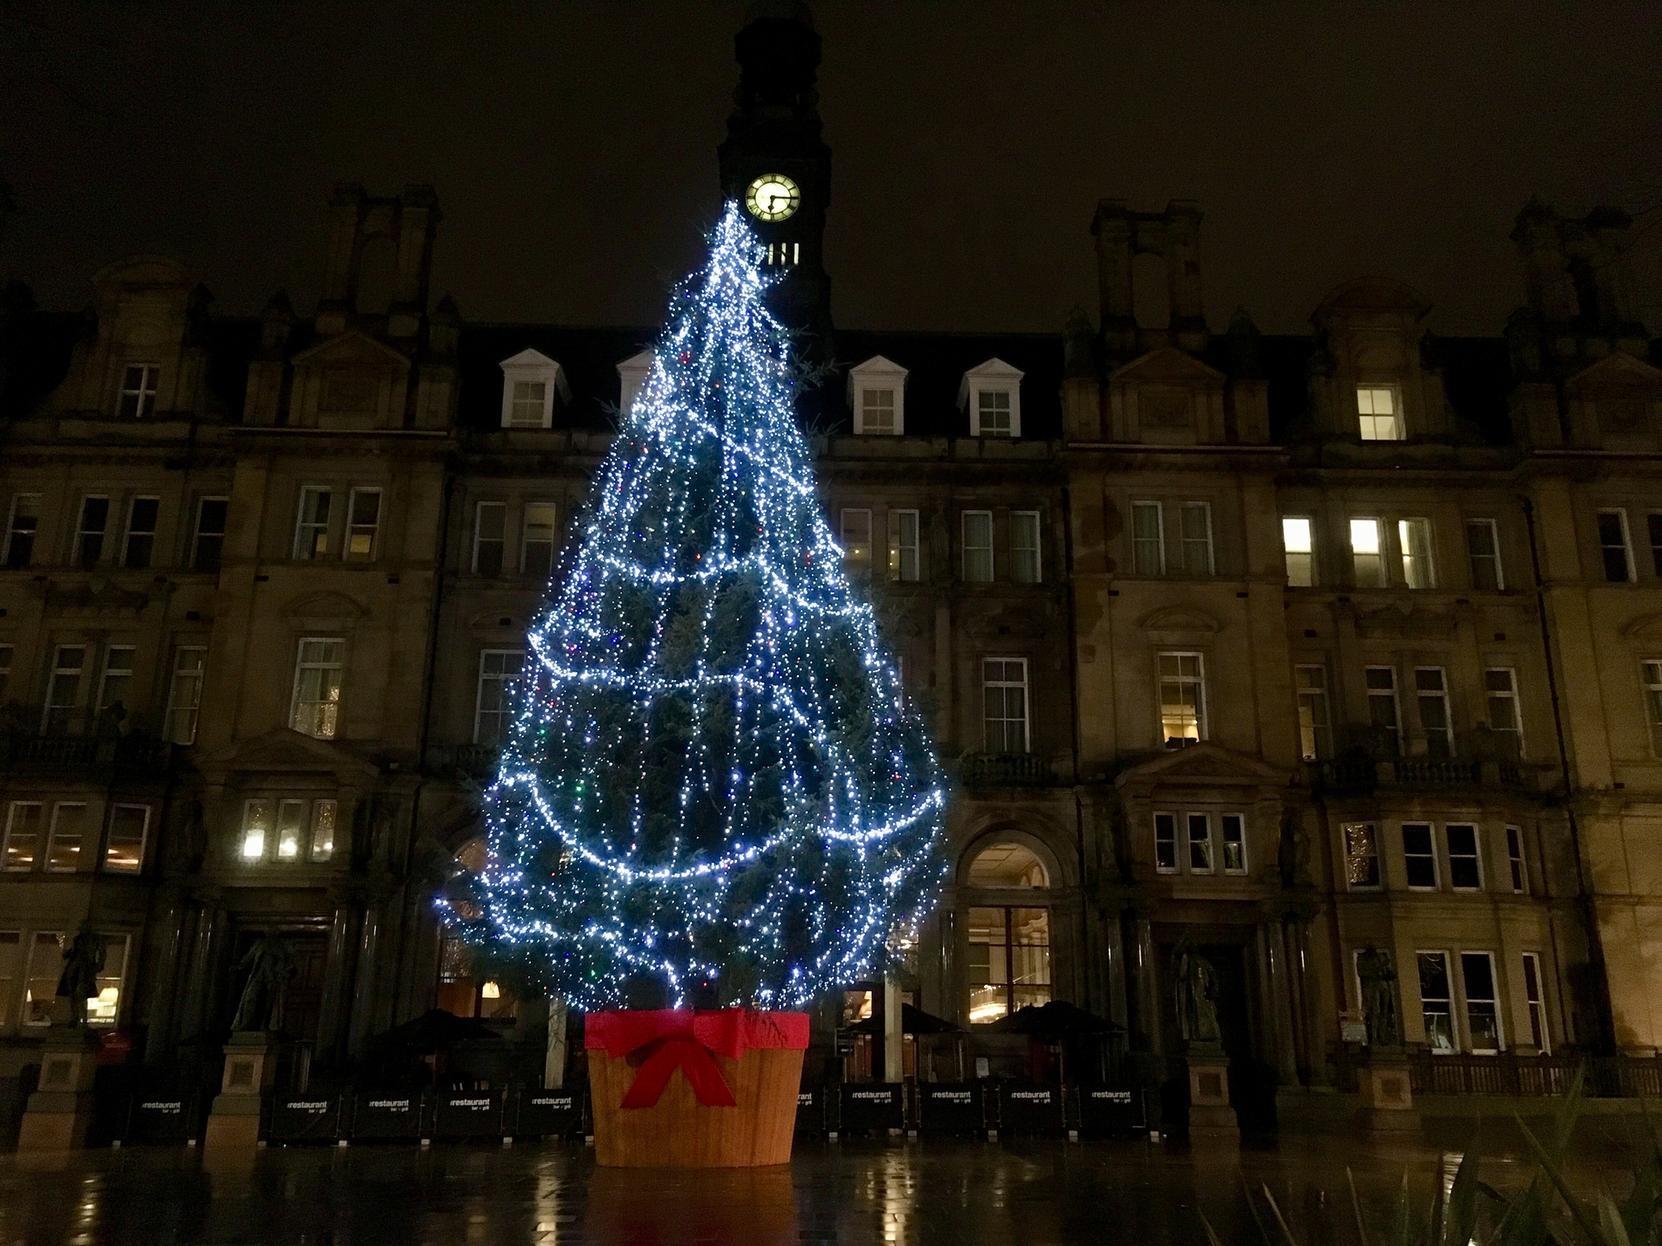 Admire the colossal Christmas tree standing proud in City Square with its traditional style pot to compliment the heritage of the neighbouring buildings.